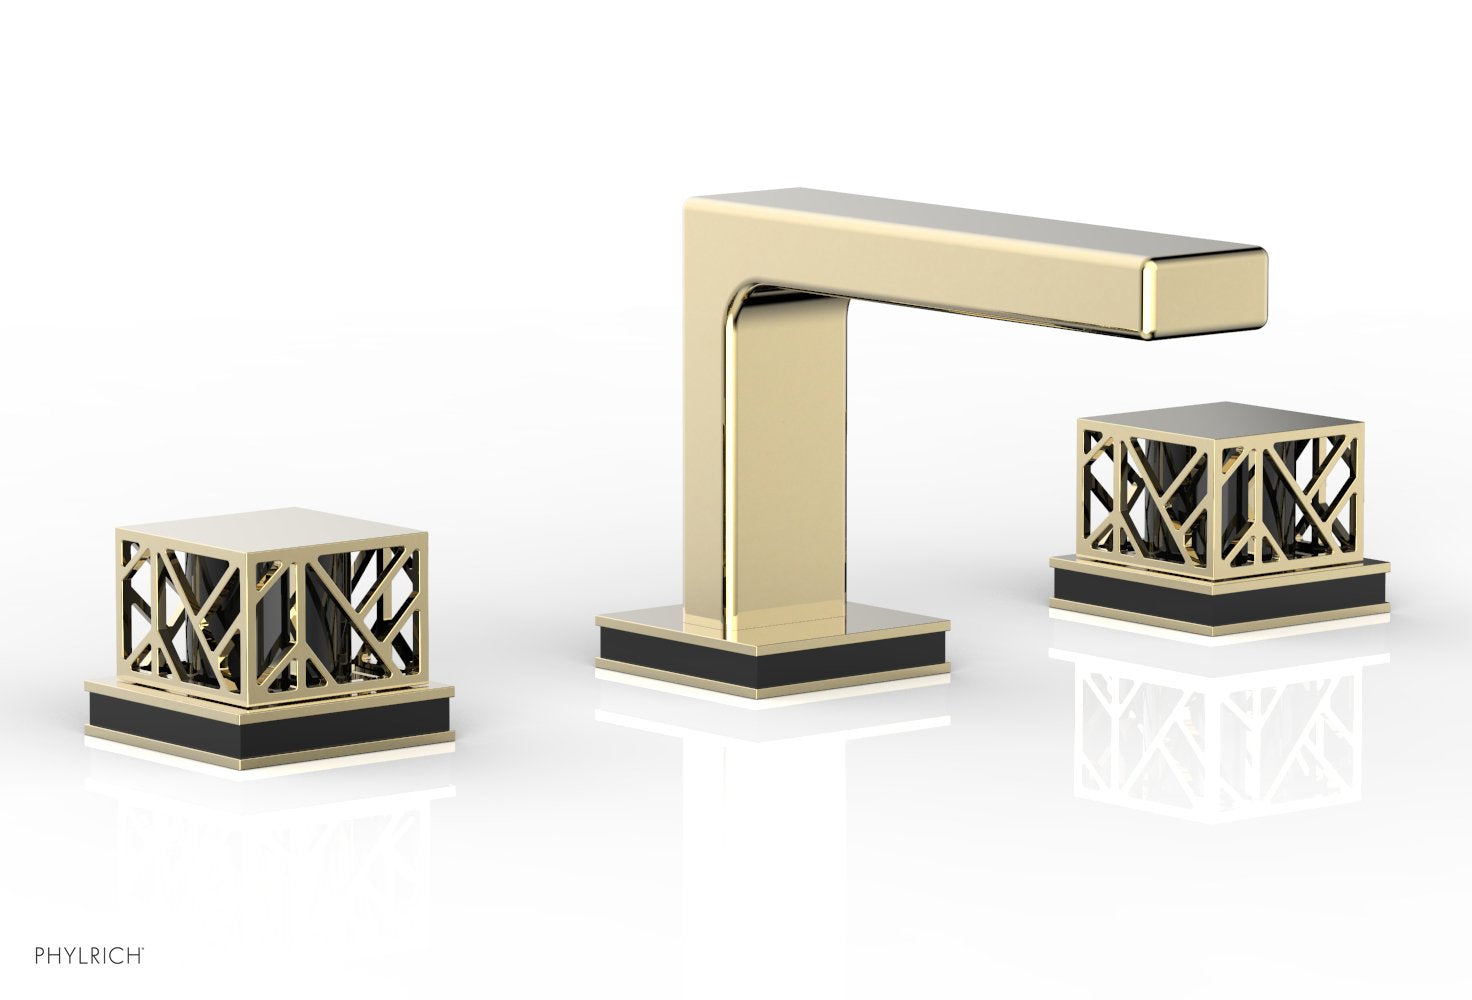 Phylrich JOLIE Widespread Faucet - Square Handles with "Black" Accents